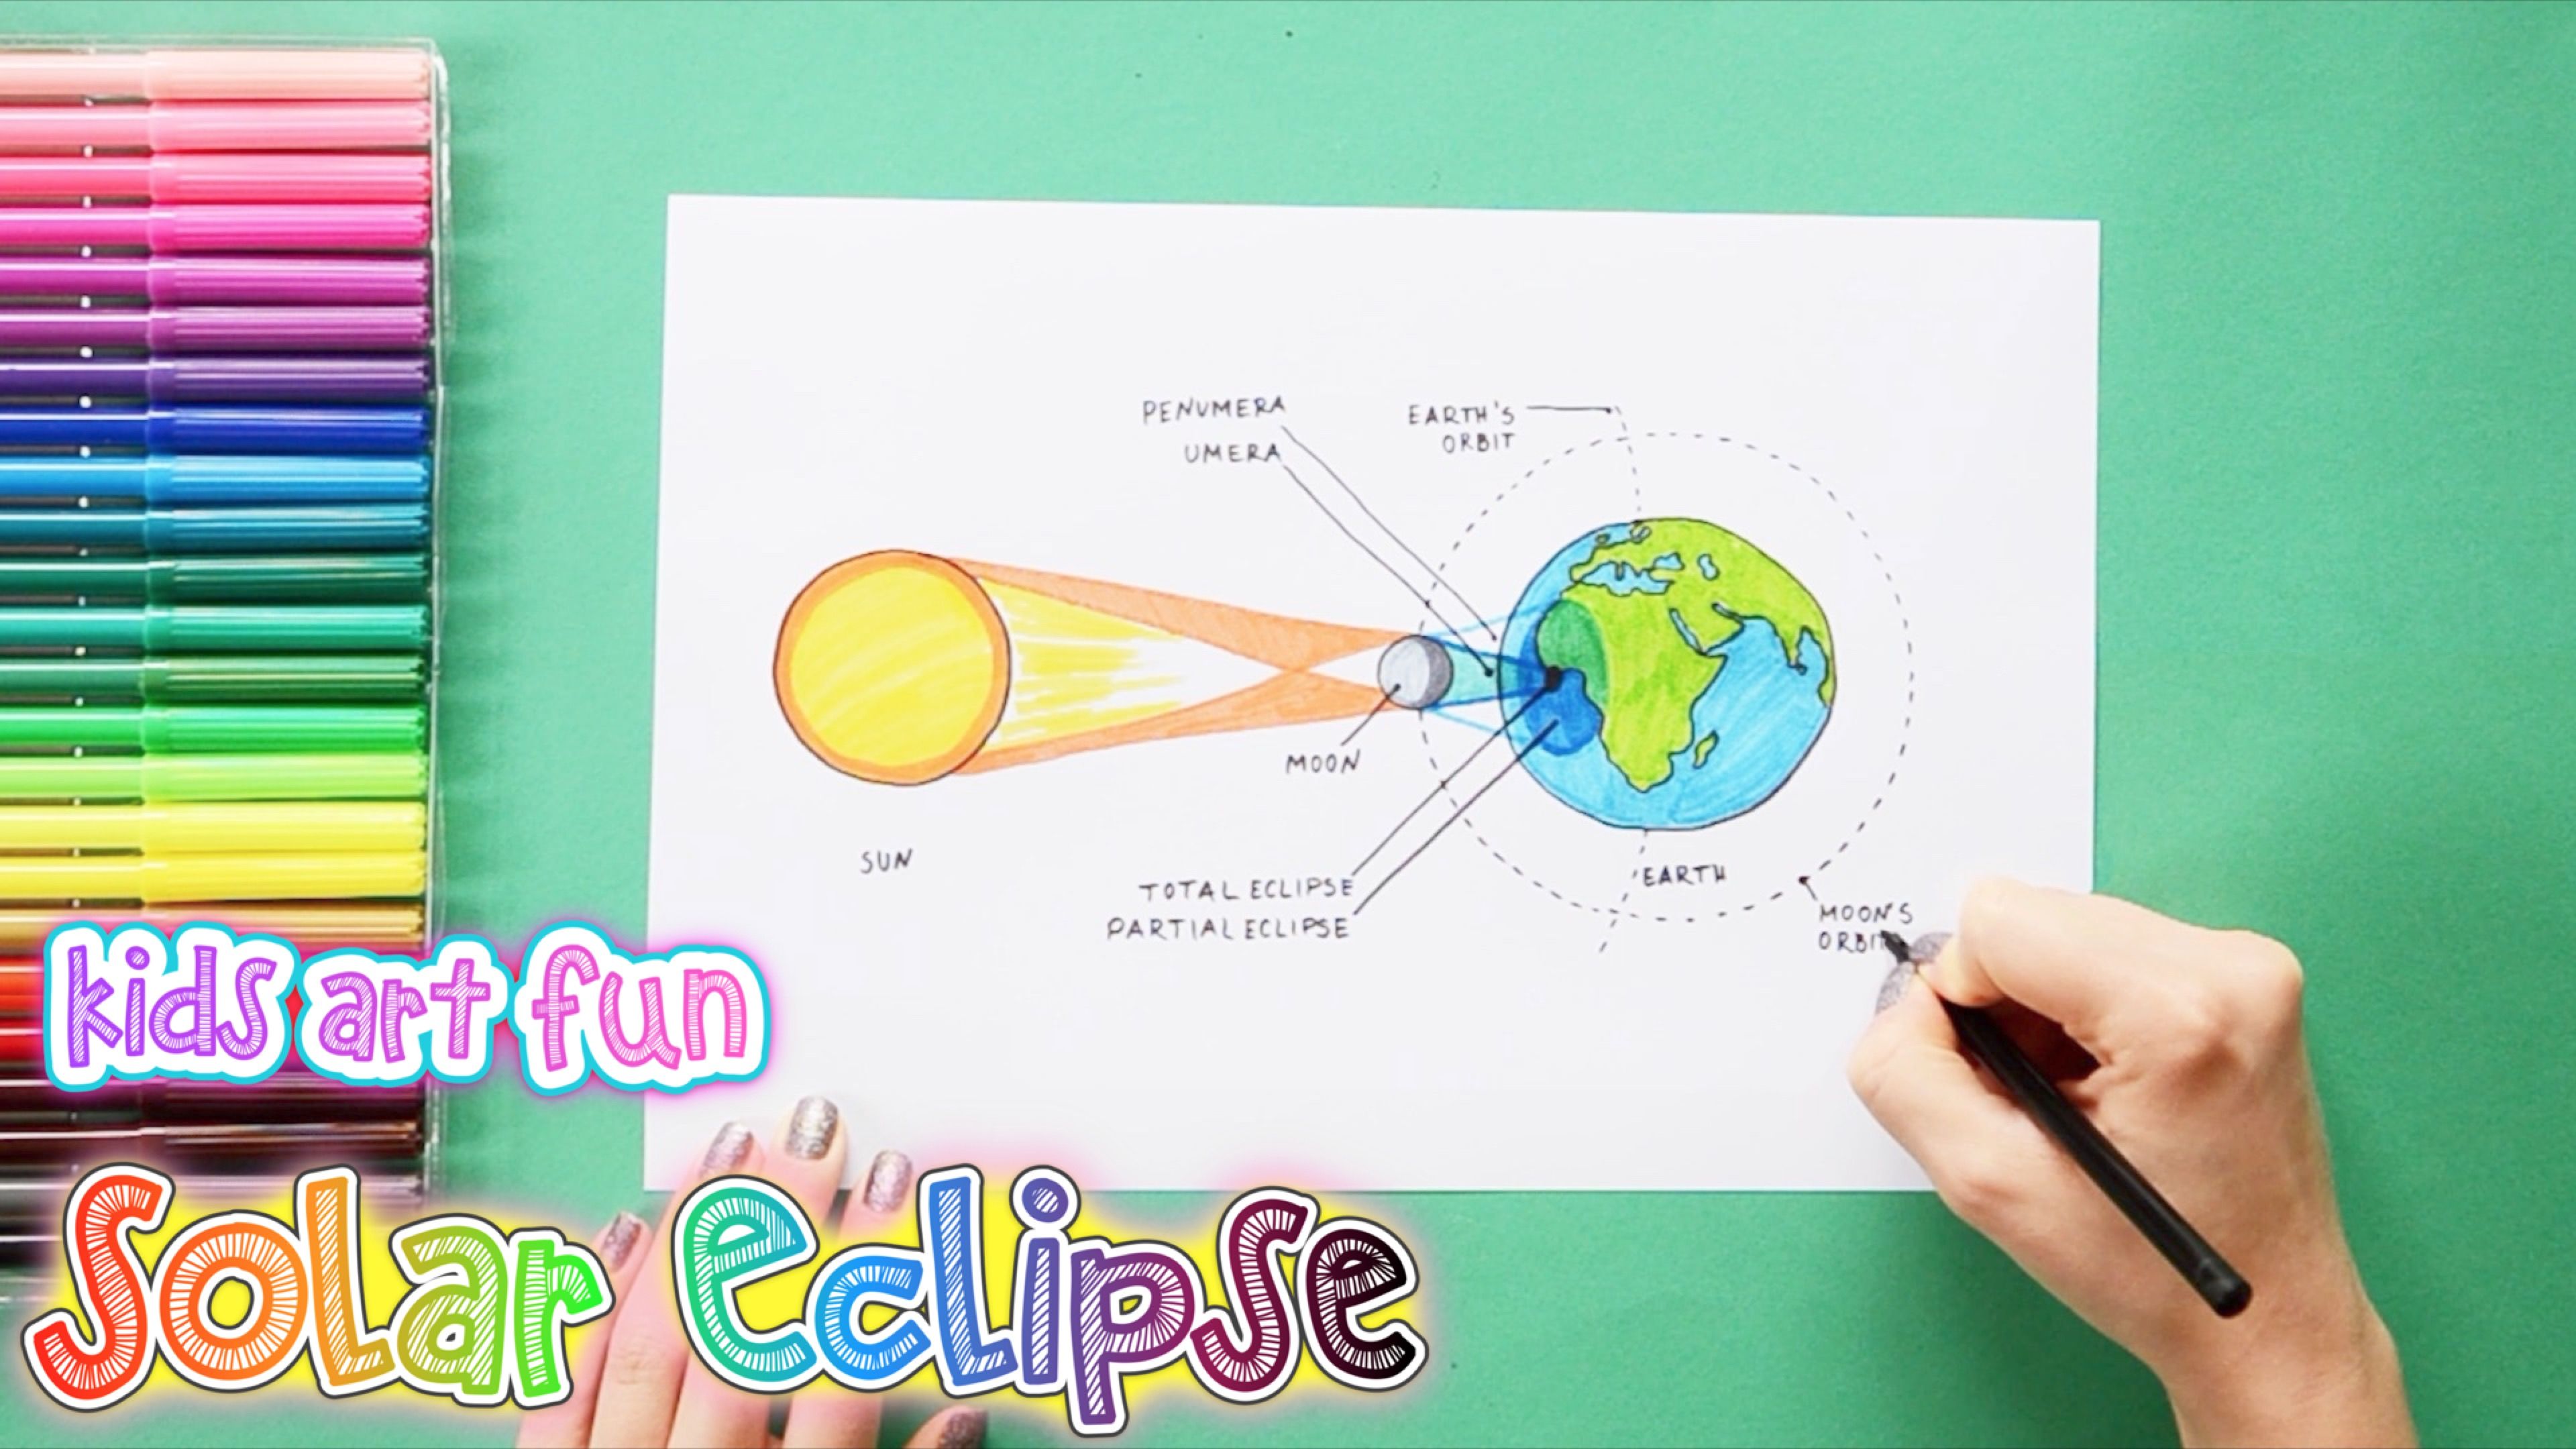 eclipse clipart drawing